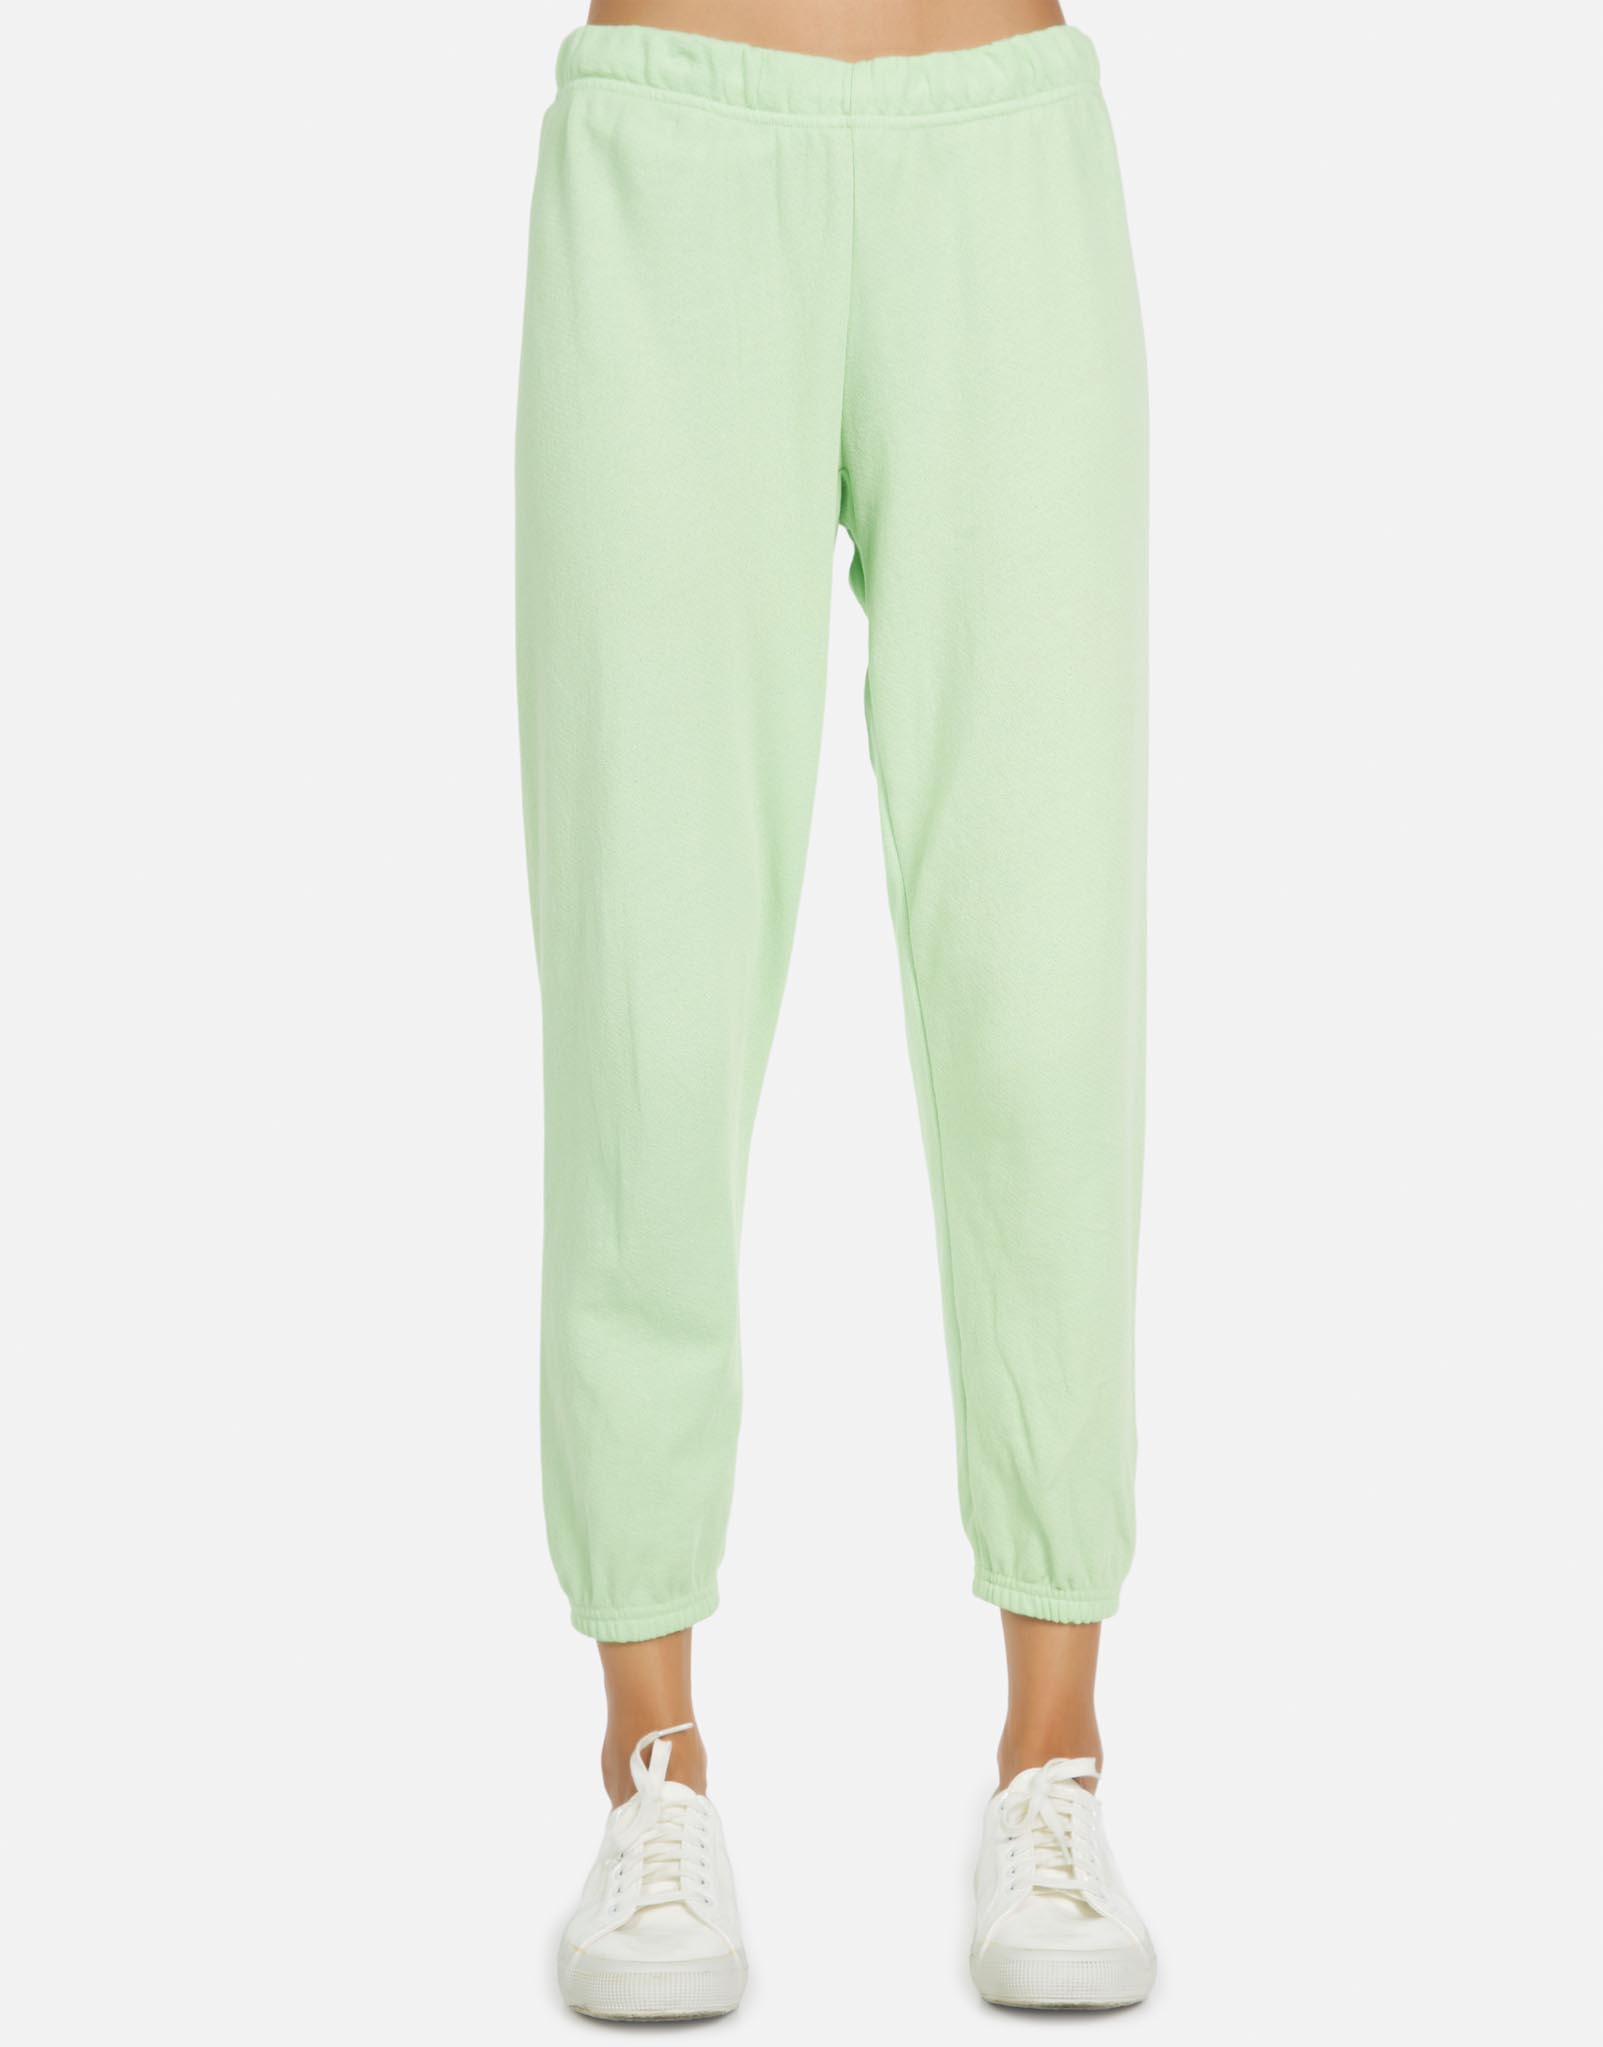 Nate LE Neon Green Crop Sweatpant - Slime Green L